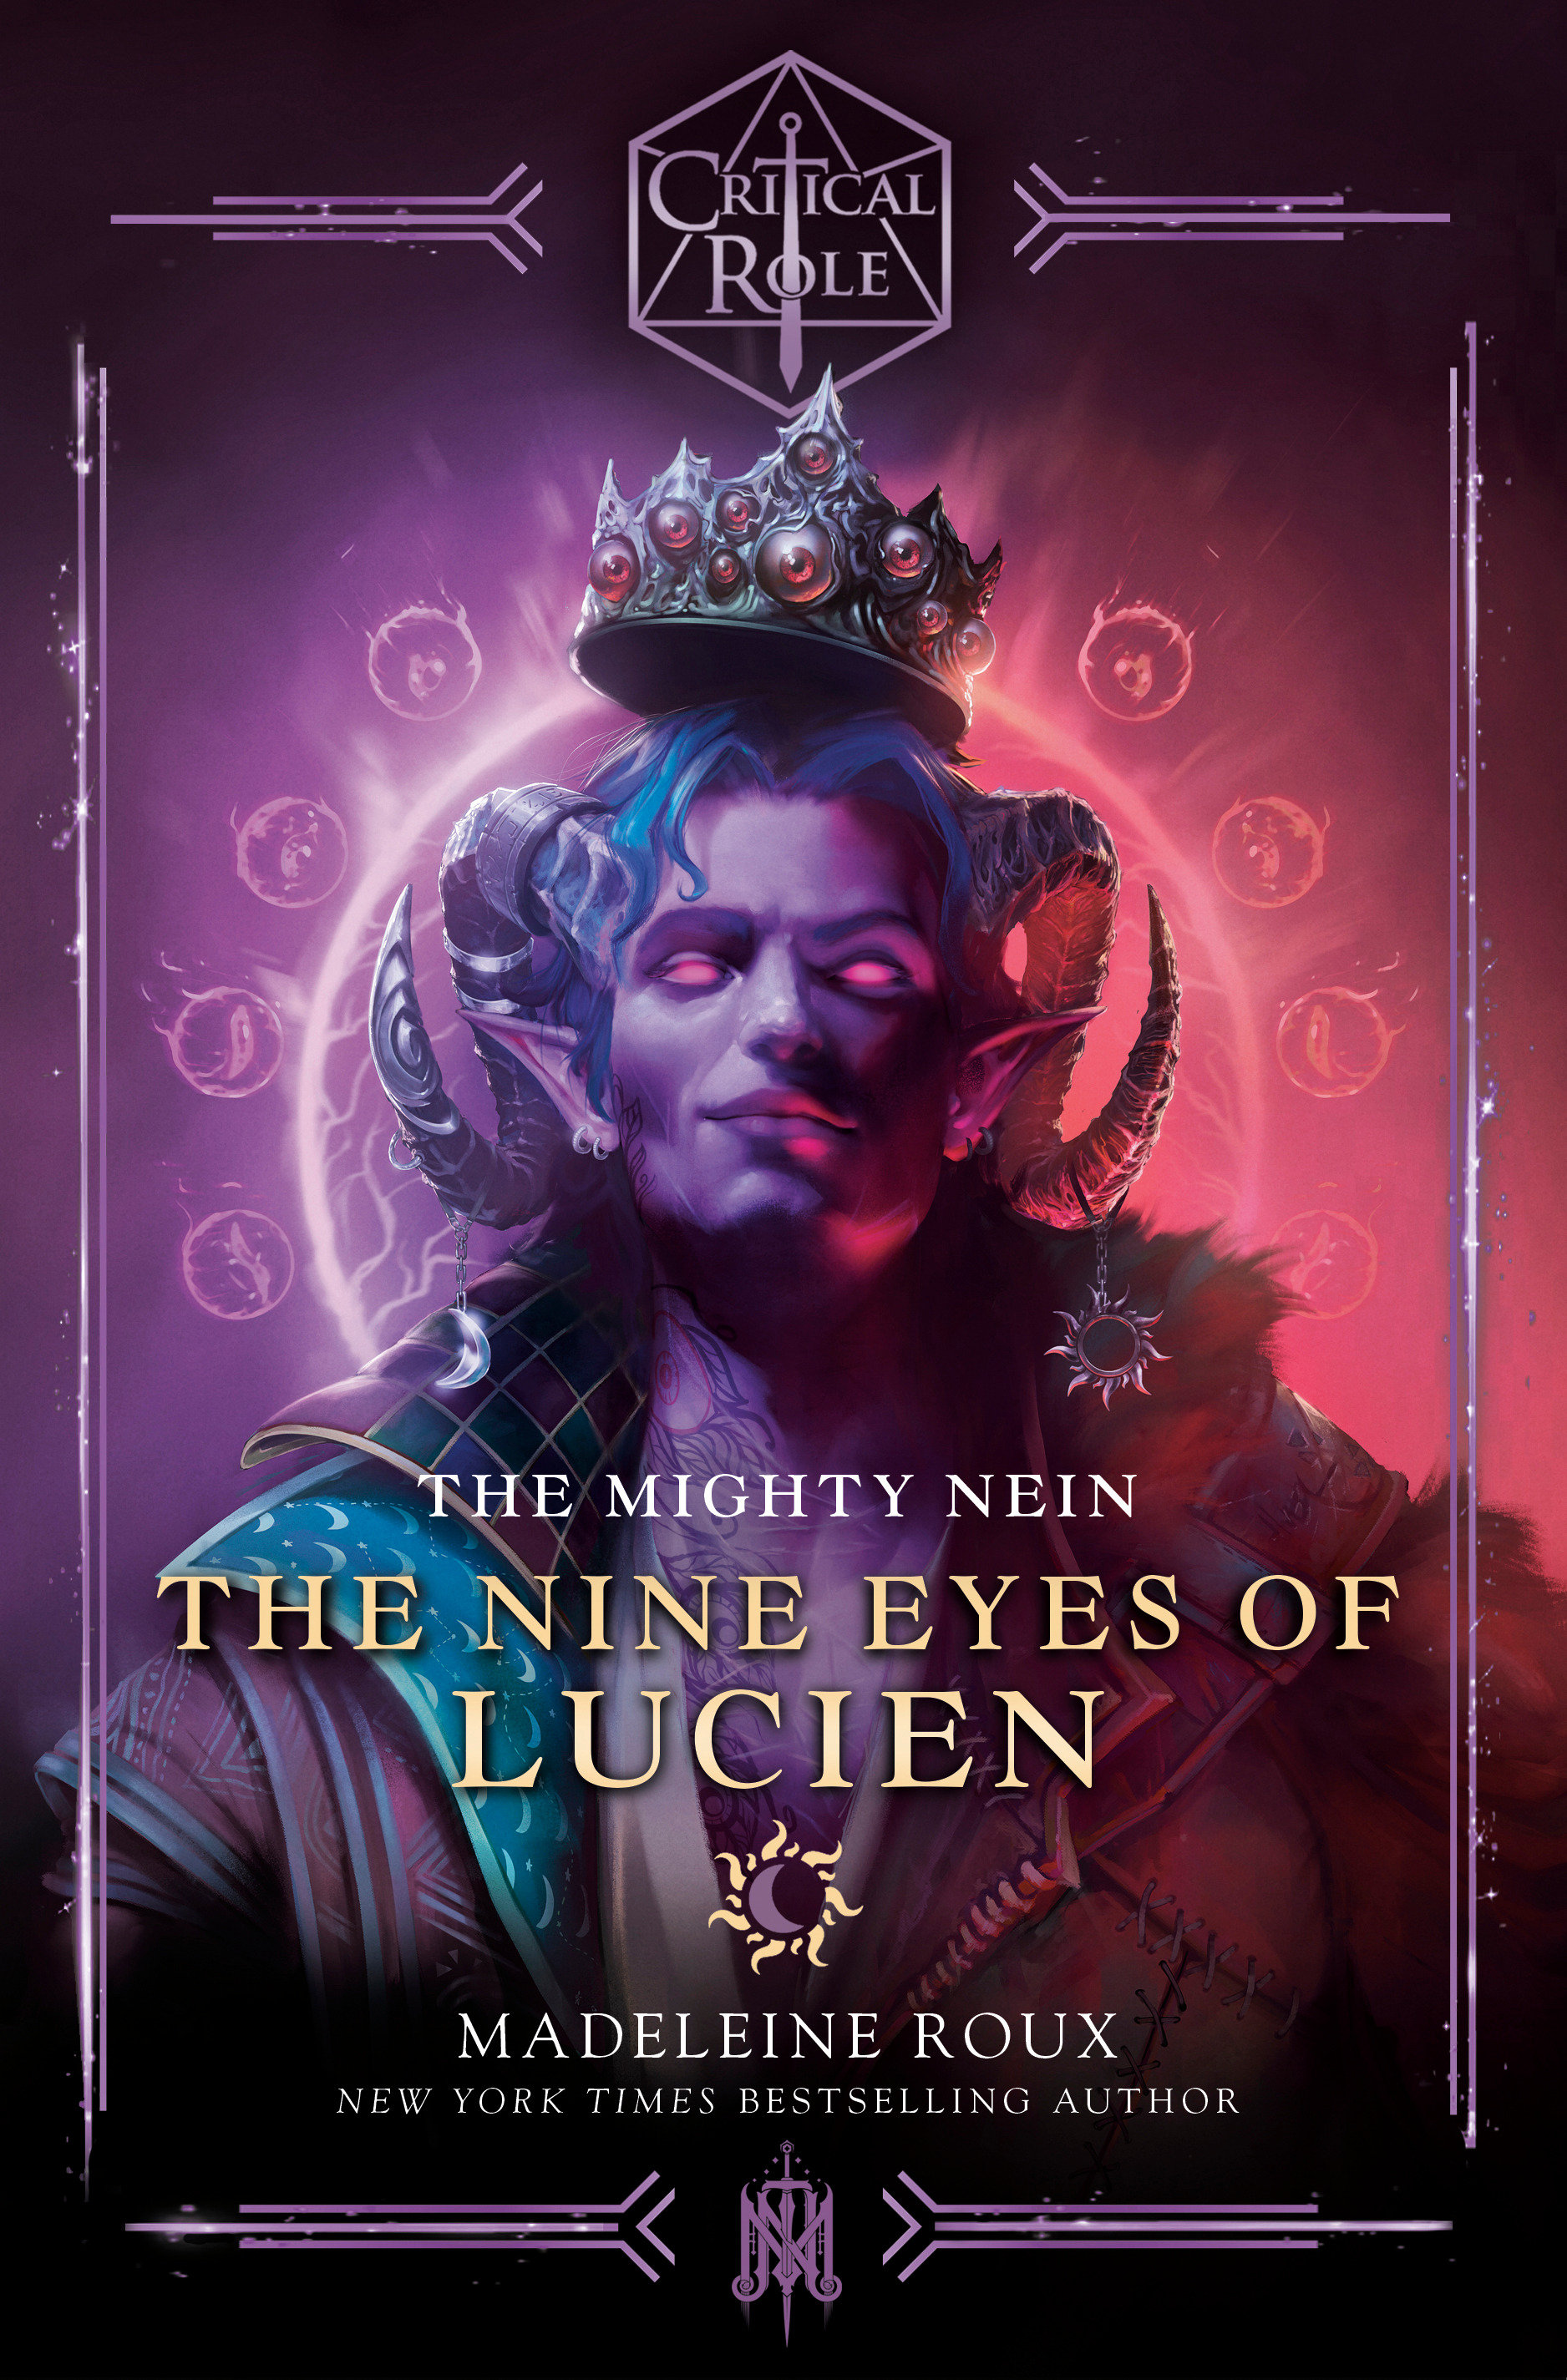 Critical Role The Mighty Nein The Nine Eyes of Lucien